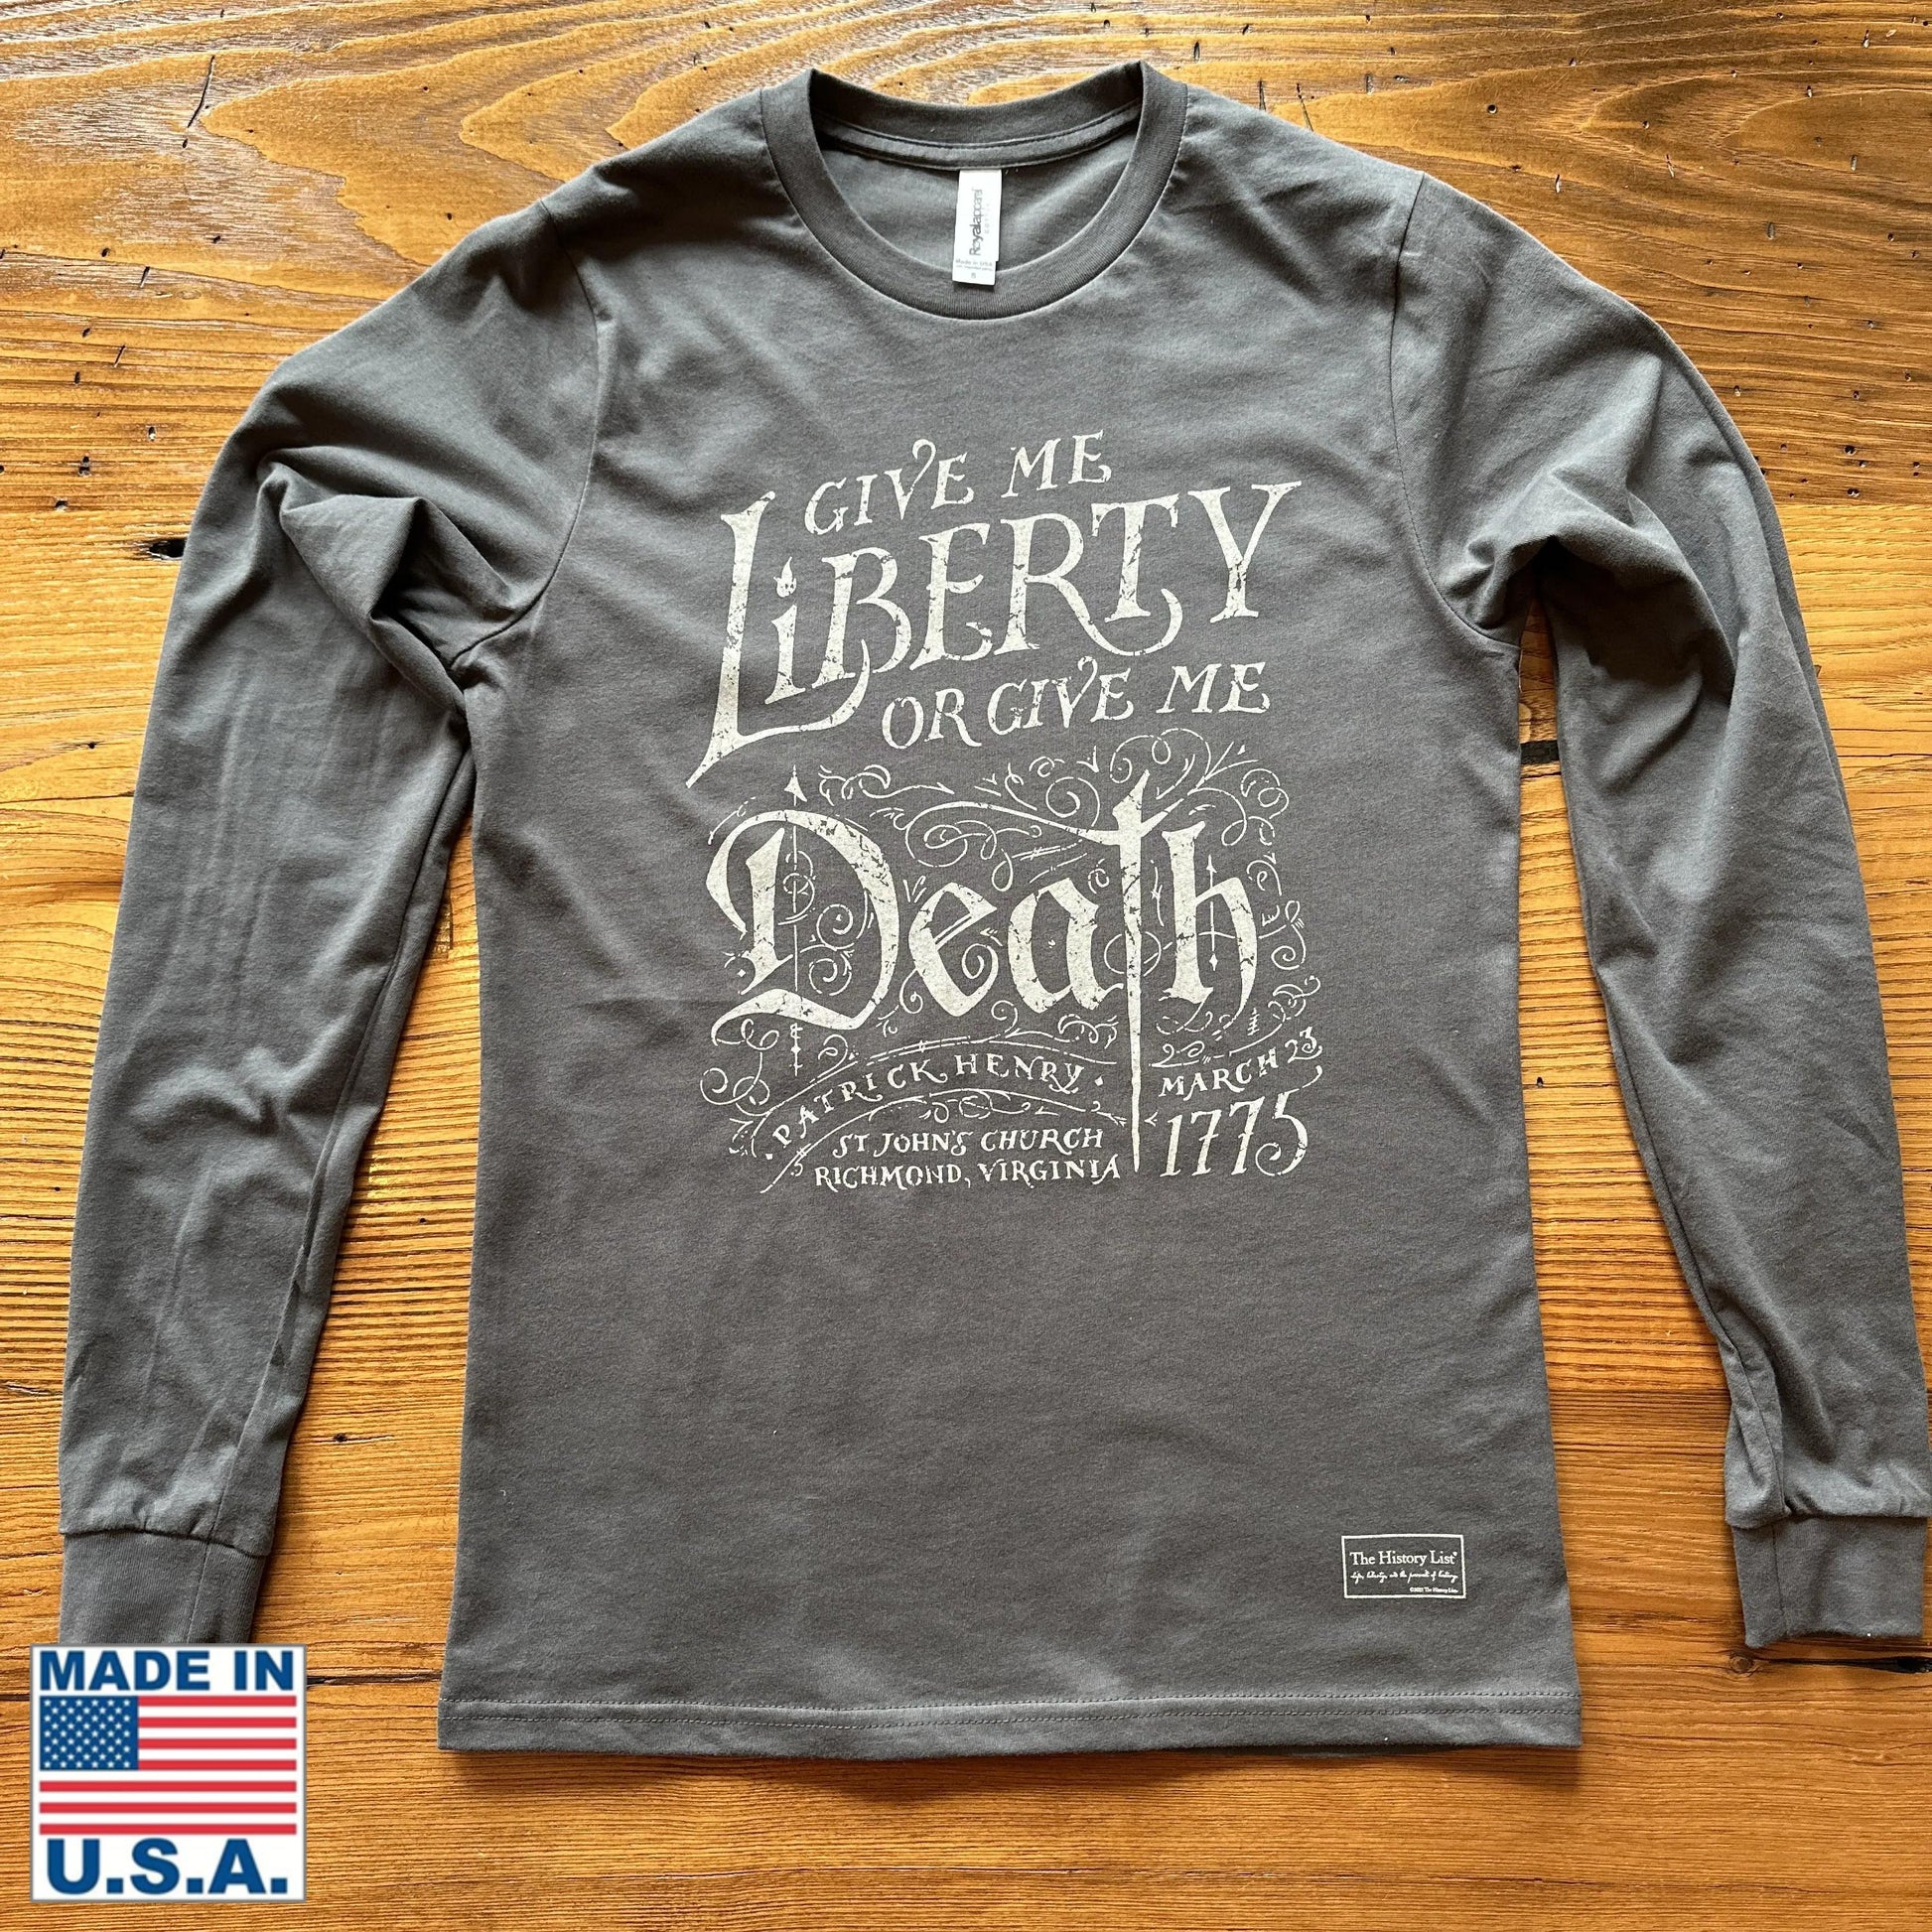 "Give me liberty, or give me death!" Long-sleeved shirt from The History List store